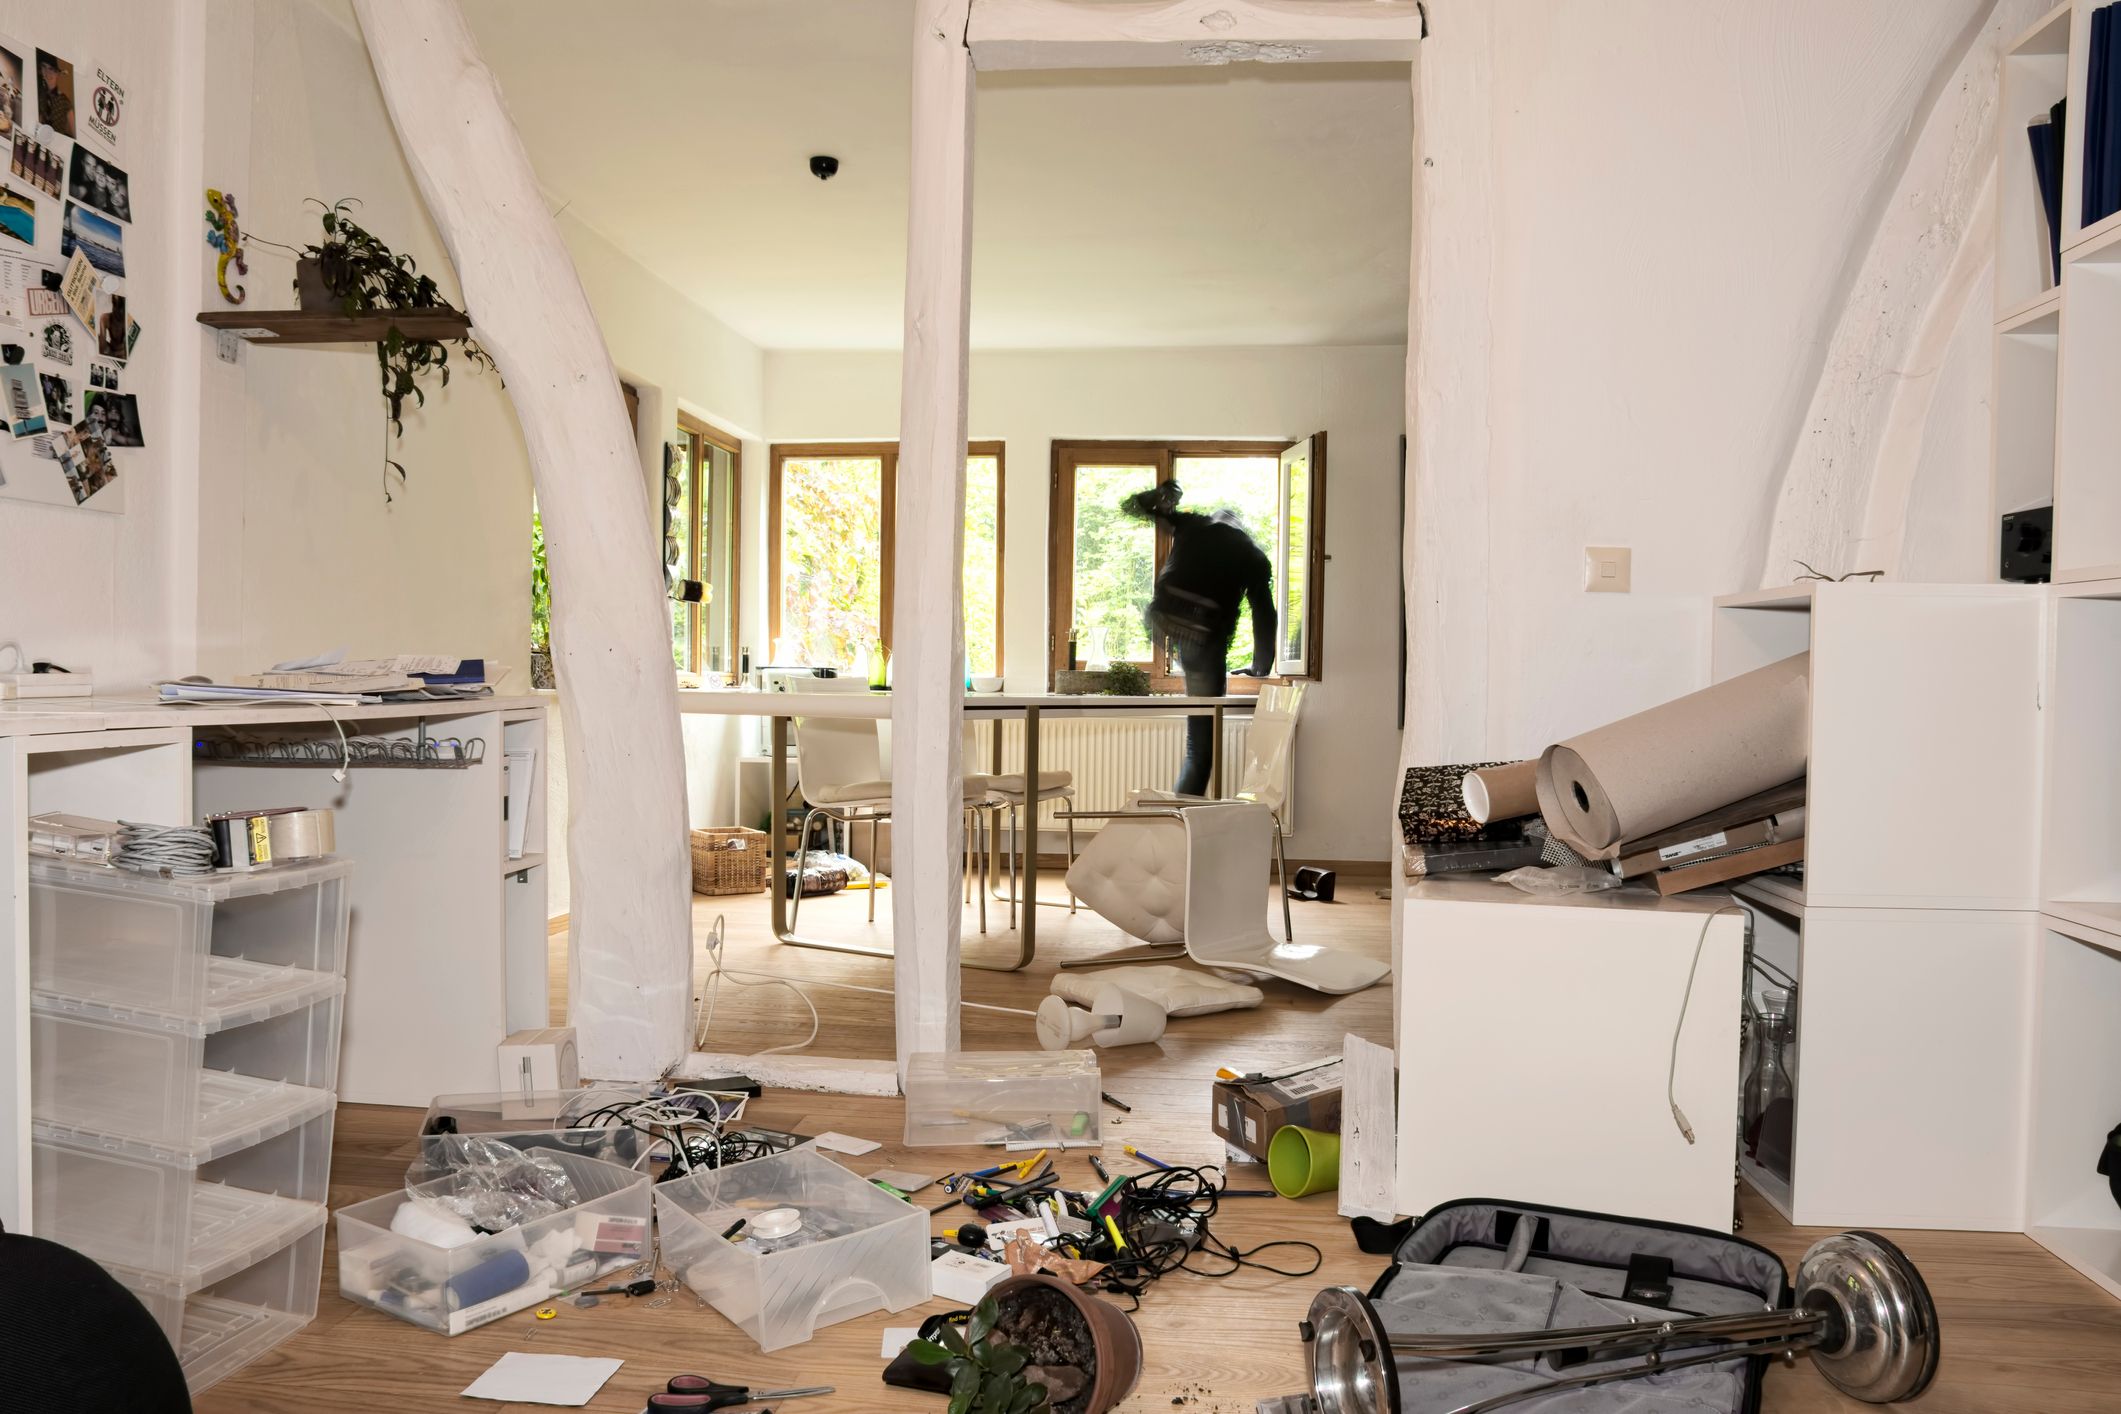 A messy house | Source: Getty Images